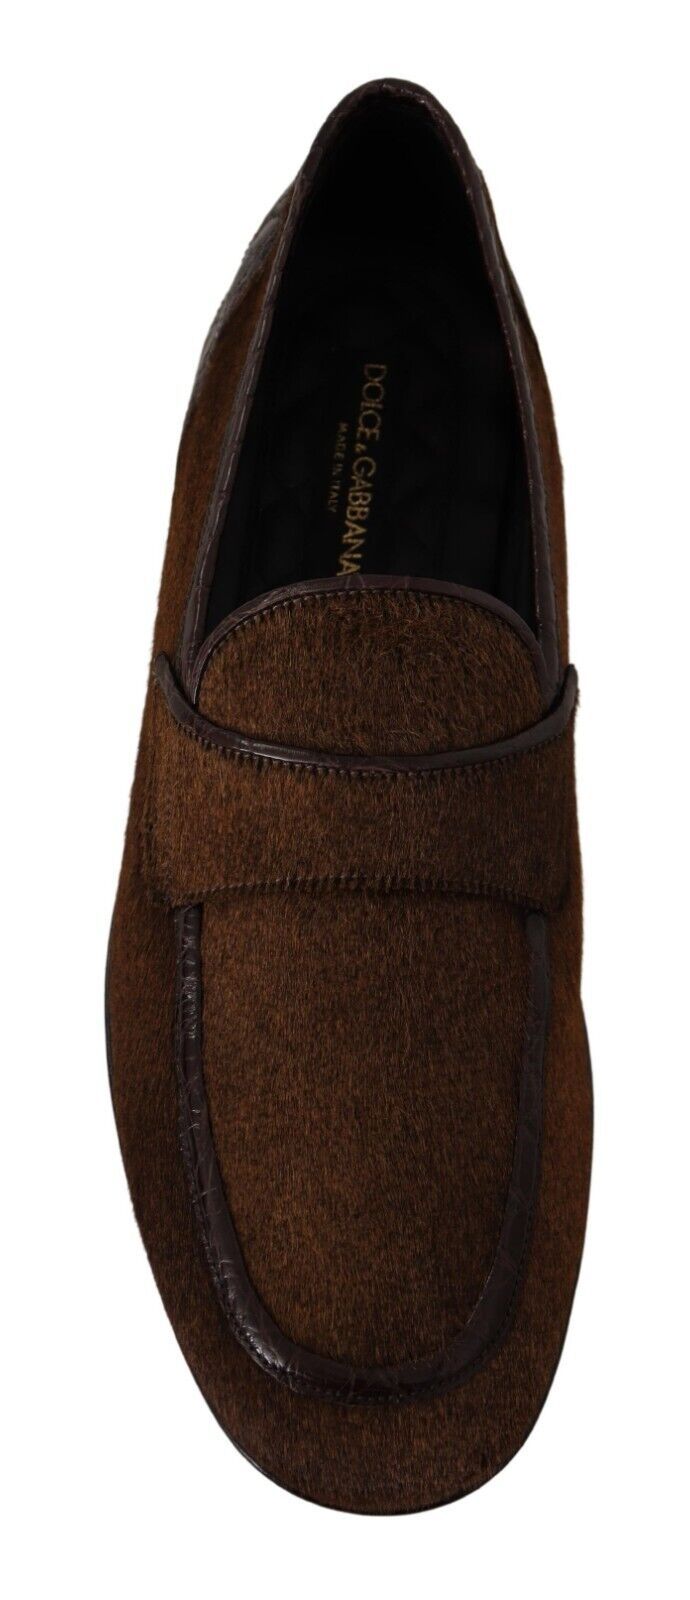 Dolce & Gabbana Brown Exotic Leather Mens Slip On Loafers Shoes - Walbiz.com